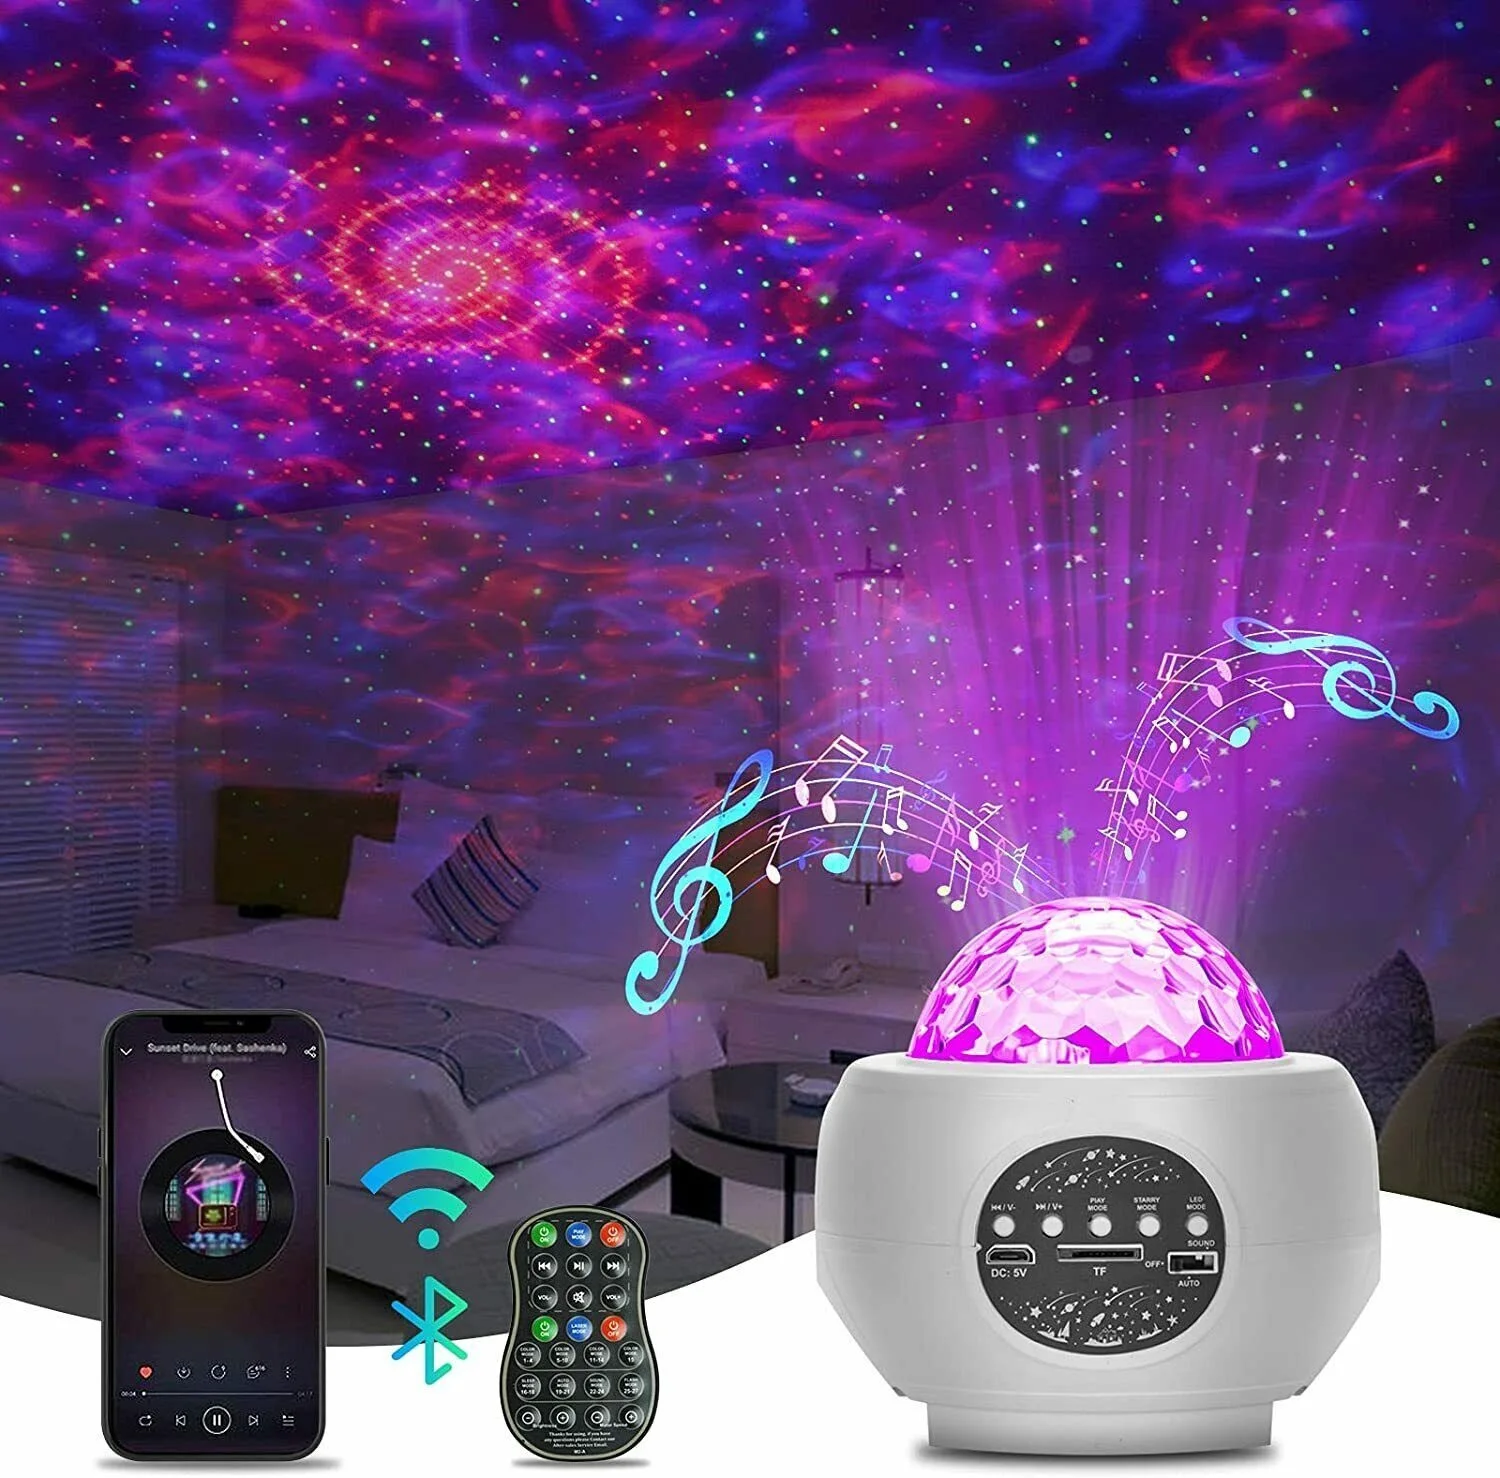 Enlarge Projector Galaxy Starry Sky Night Light Ocean Star Party Speaker LED Lamp Remote